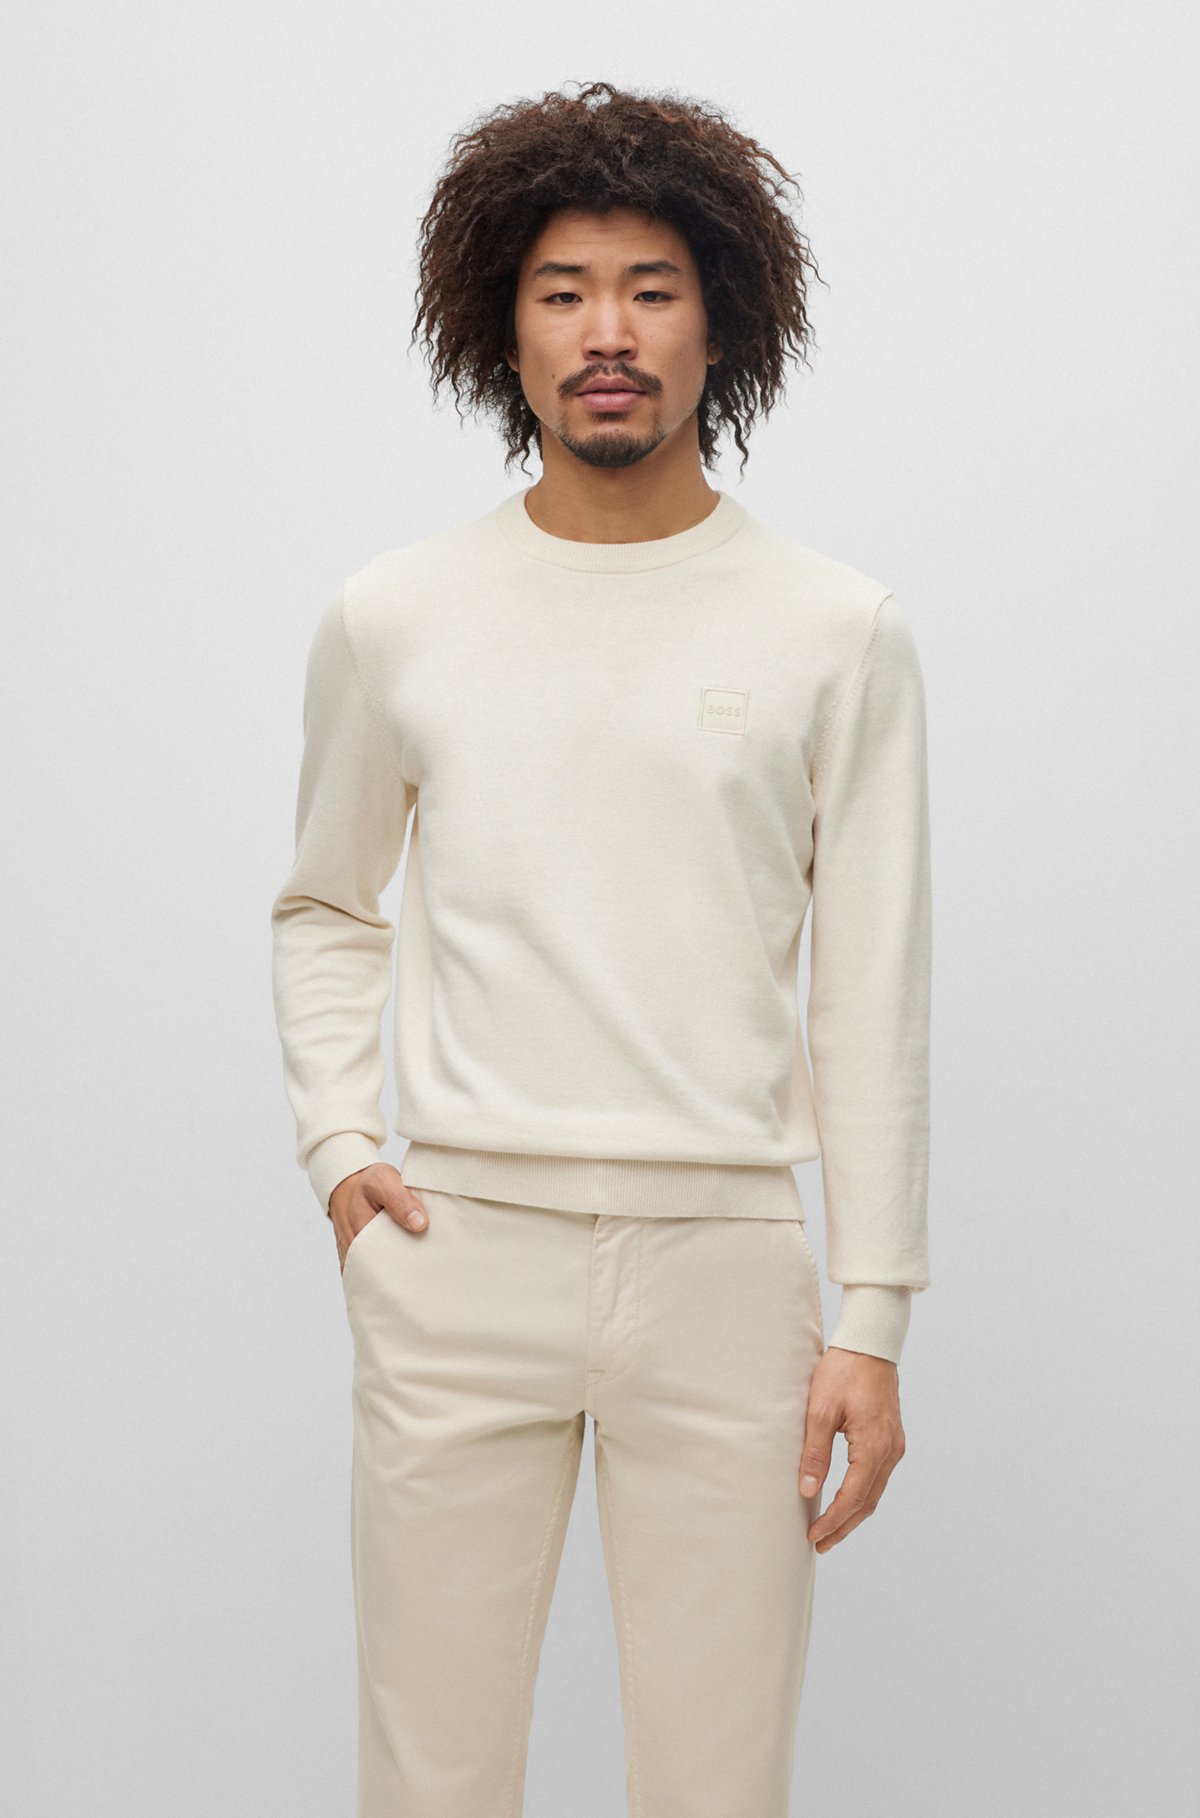 Crew-neck sweater in cotton and cashmere with logo, Natural